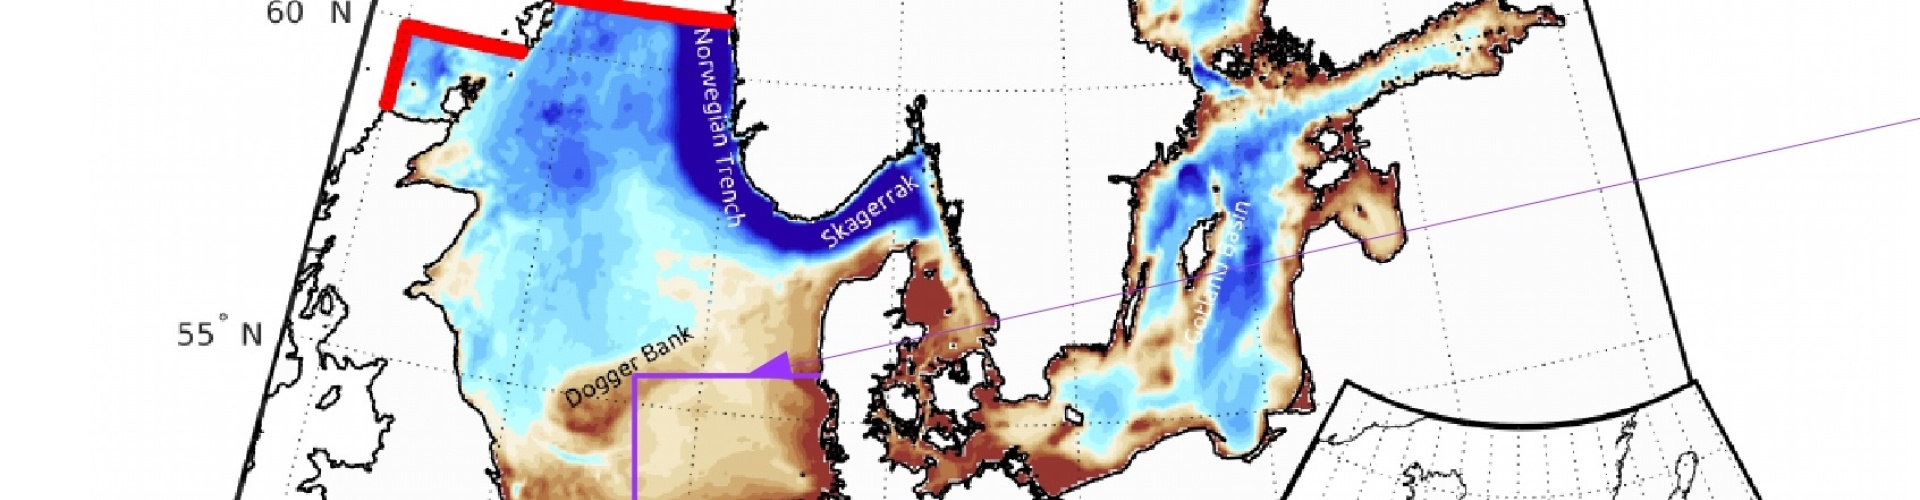 Illustration of the model domains and model bathymetry of the coupled modelling system